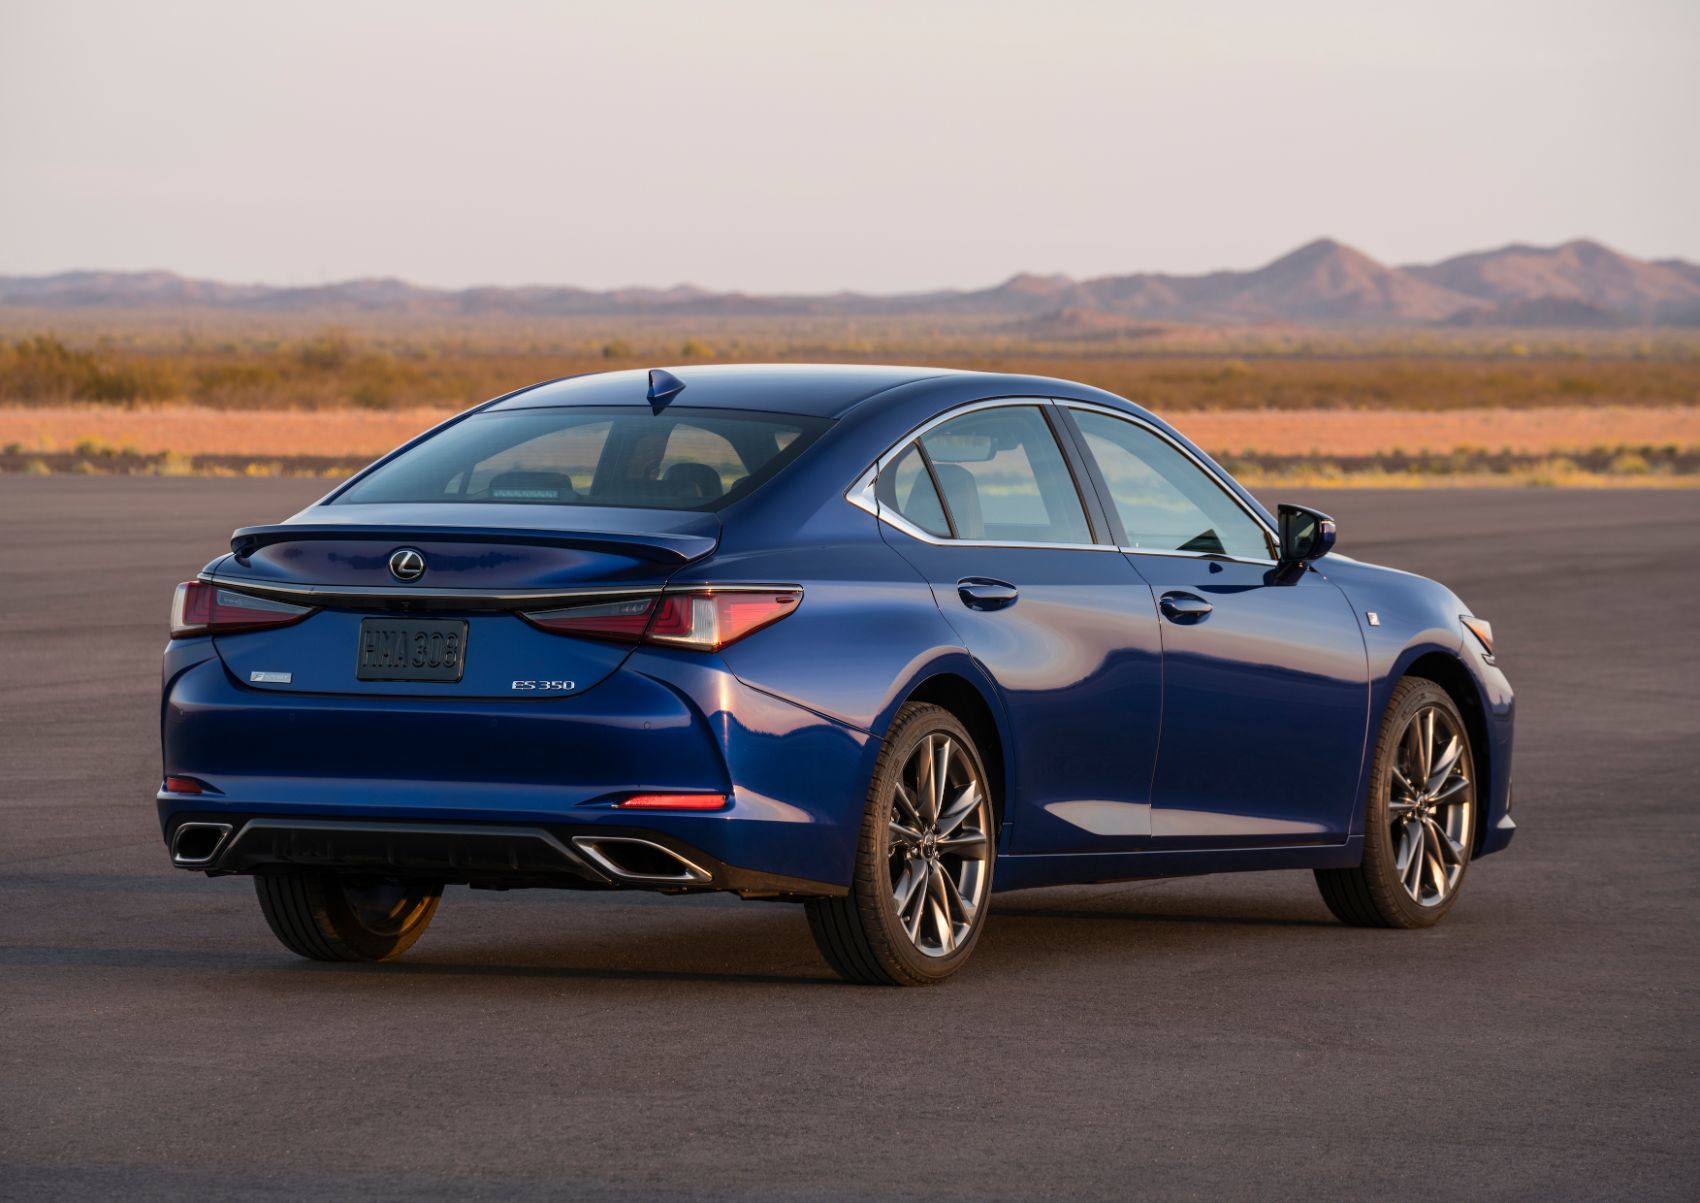 2019 Lexus Es 350 F Sport Review Well Balanced For The